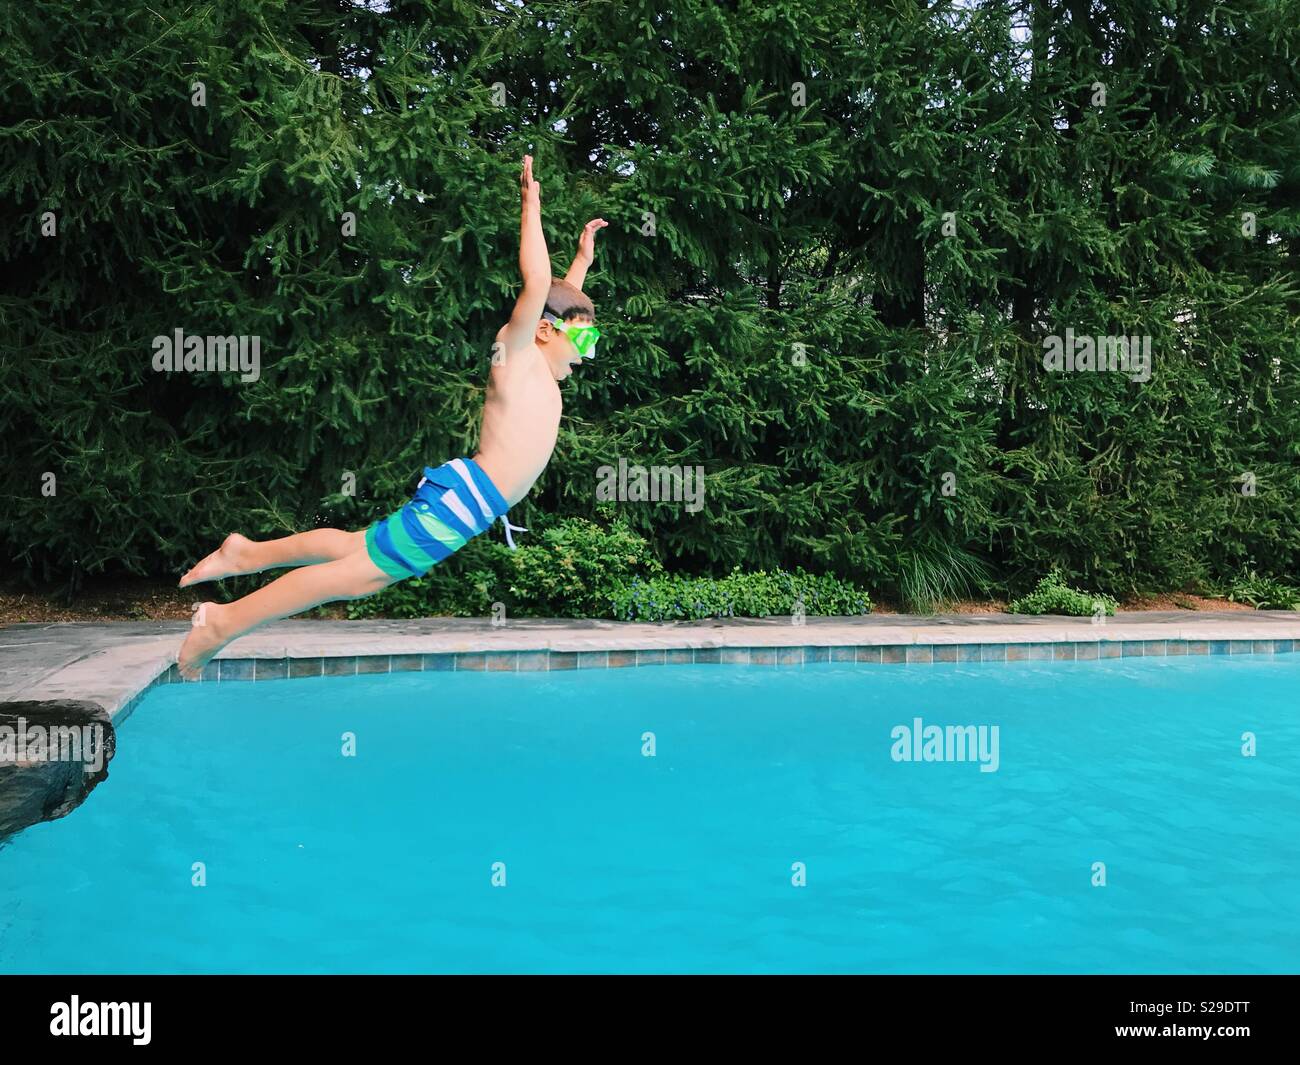 A young boy jumping into an outdoor swimming pool during summertime. Stock Photo